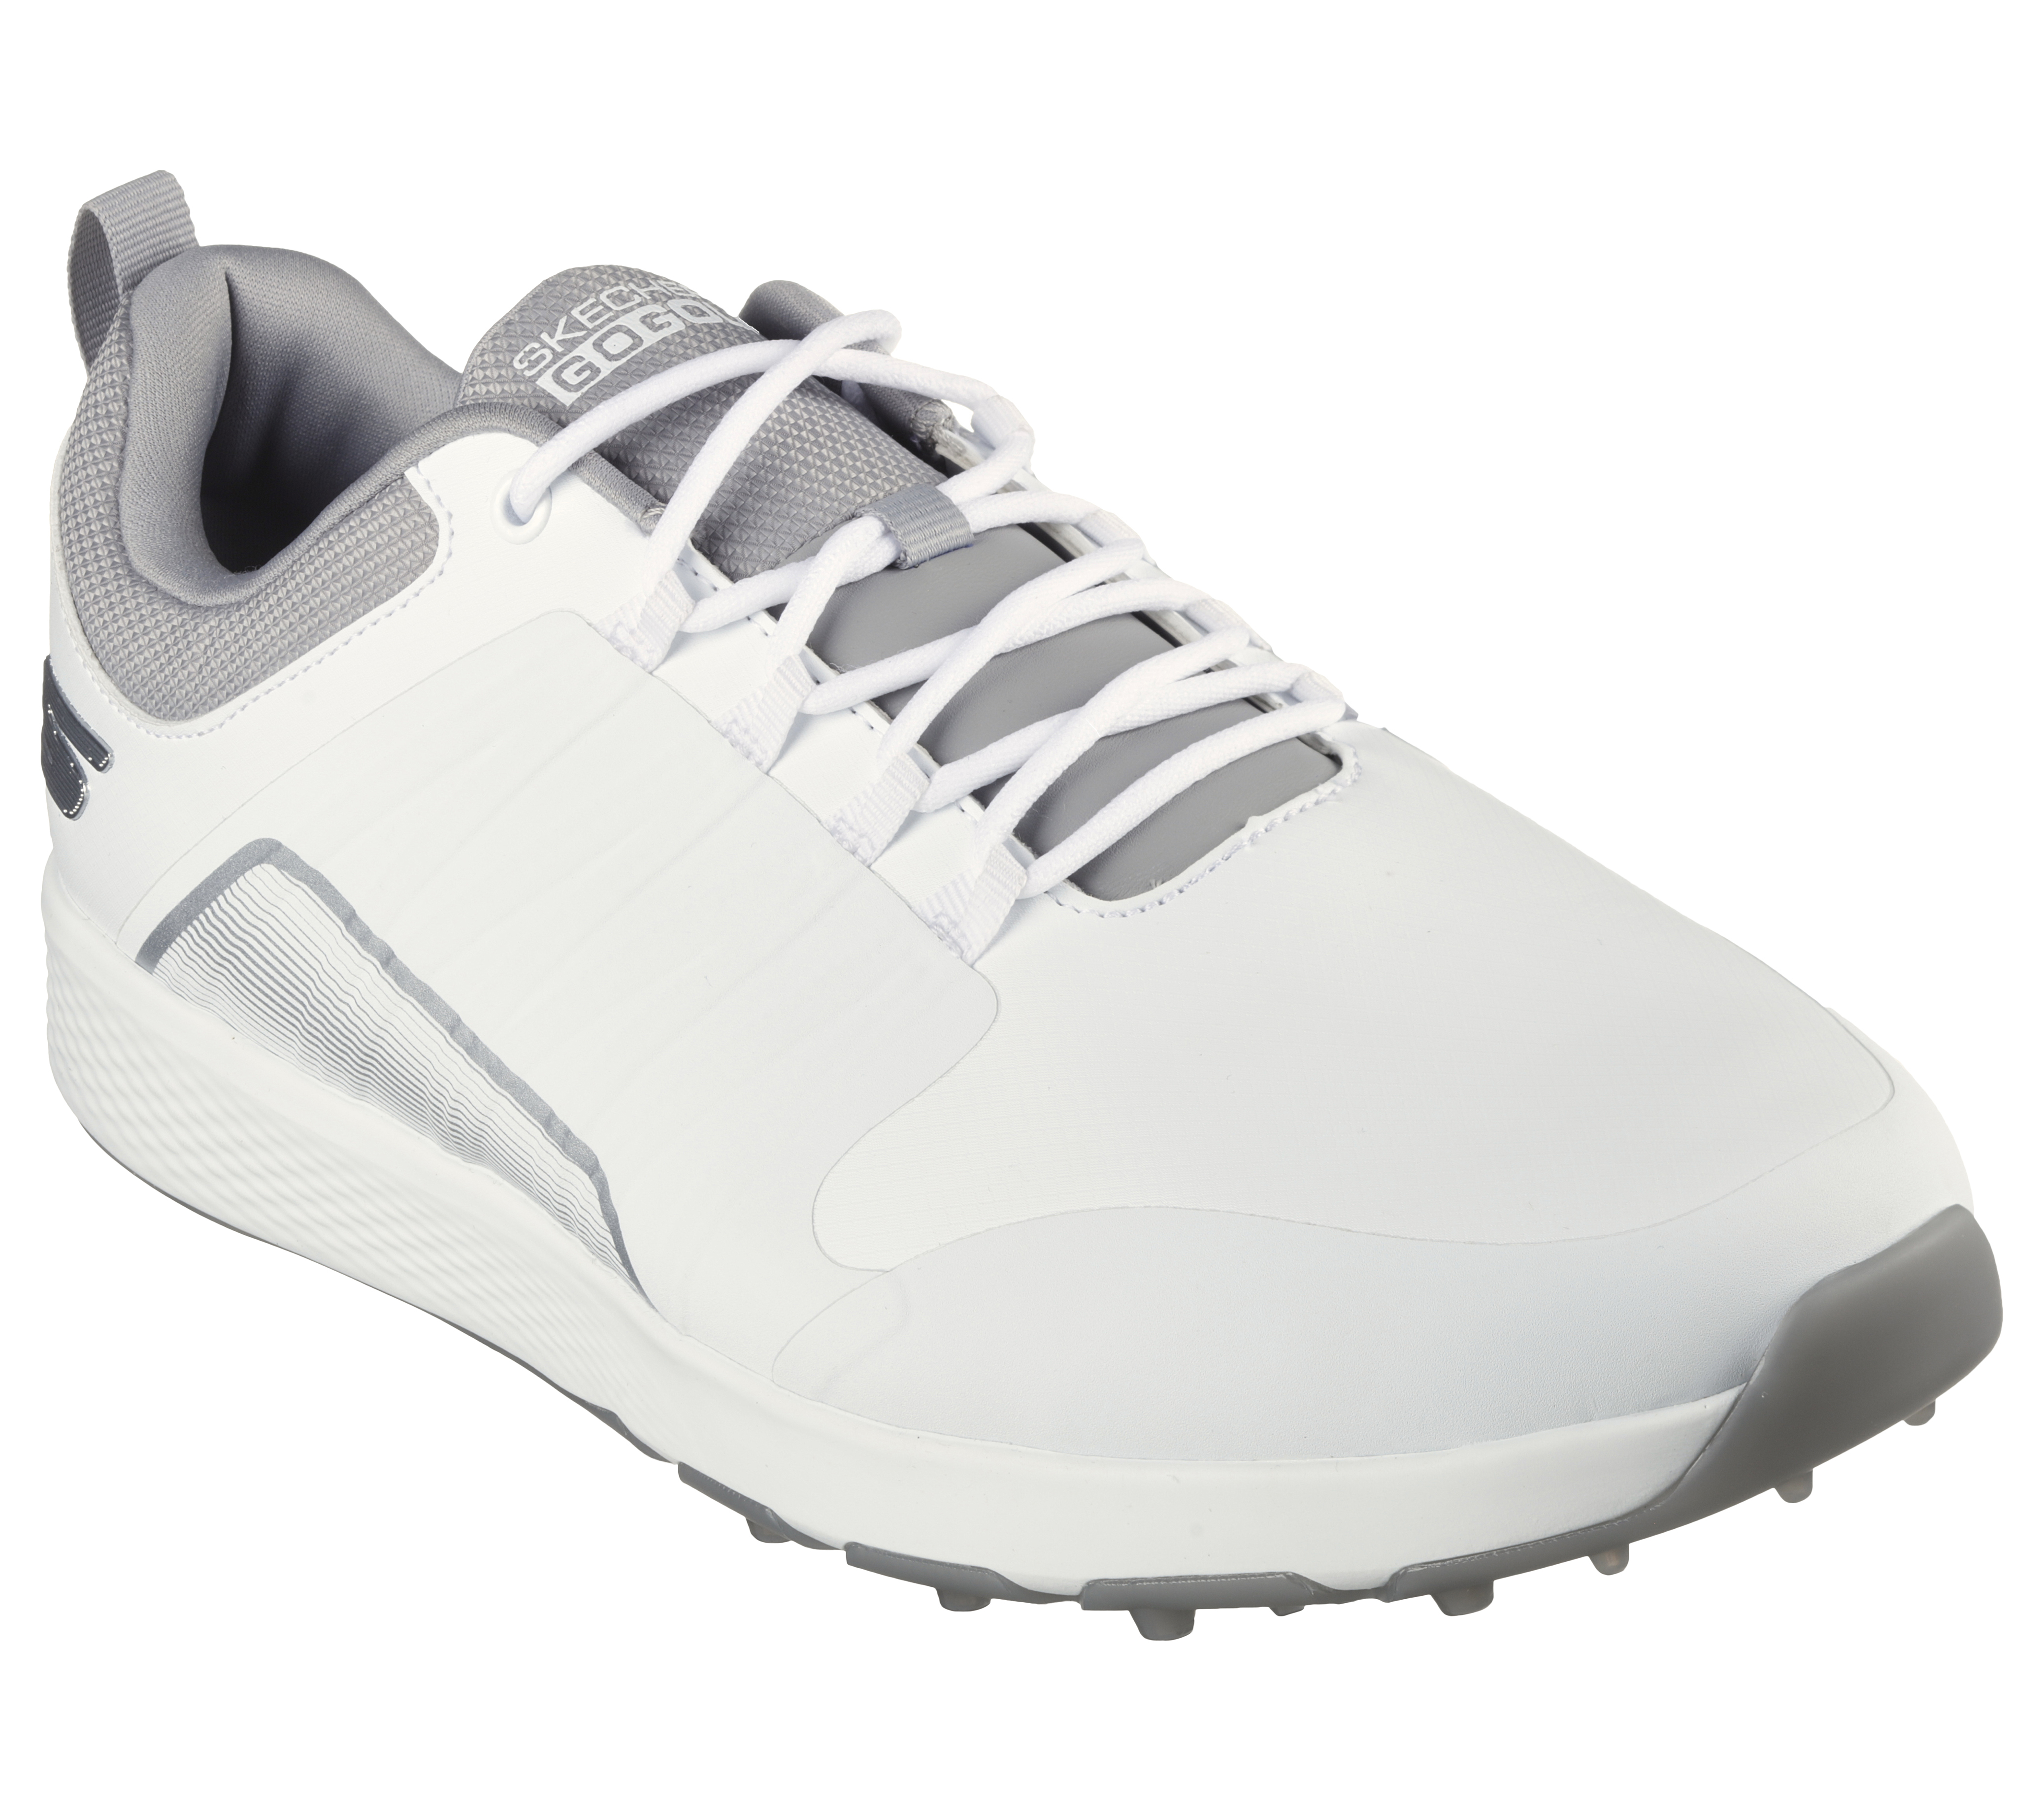 skechers golf shoes malaysia